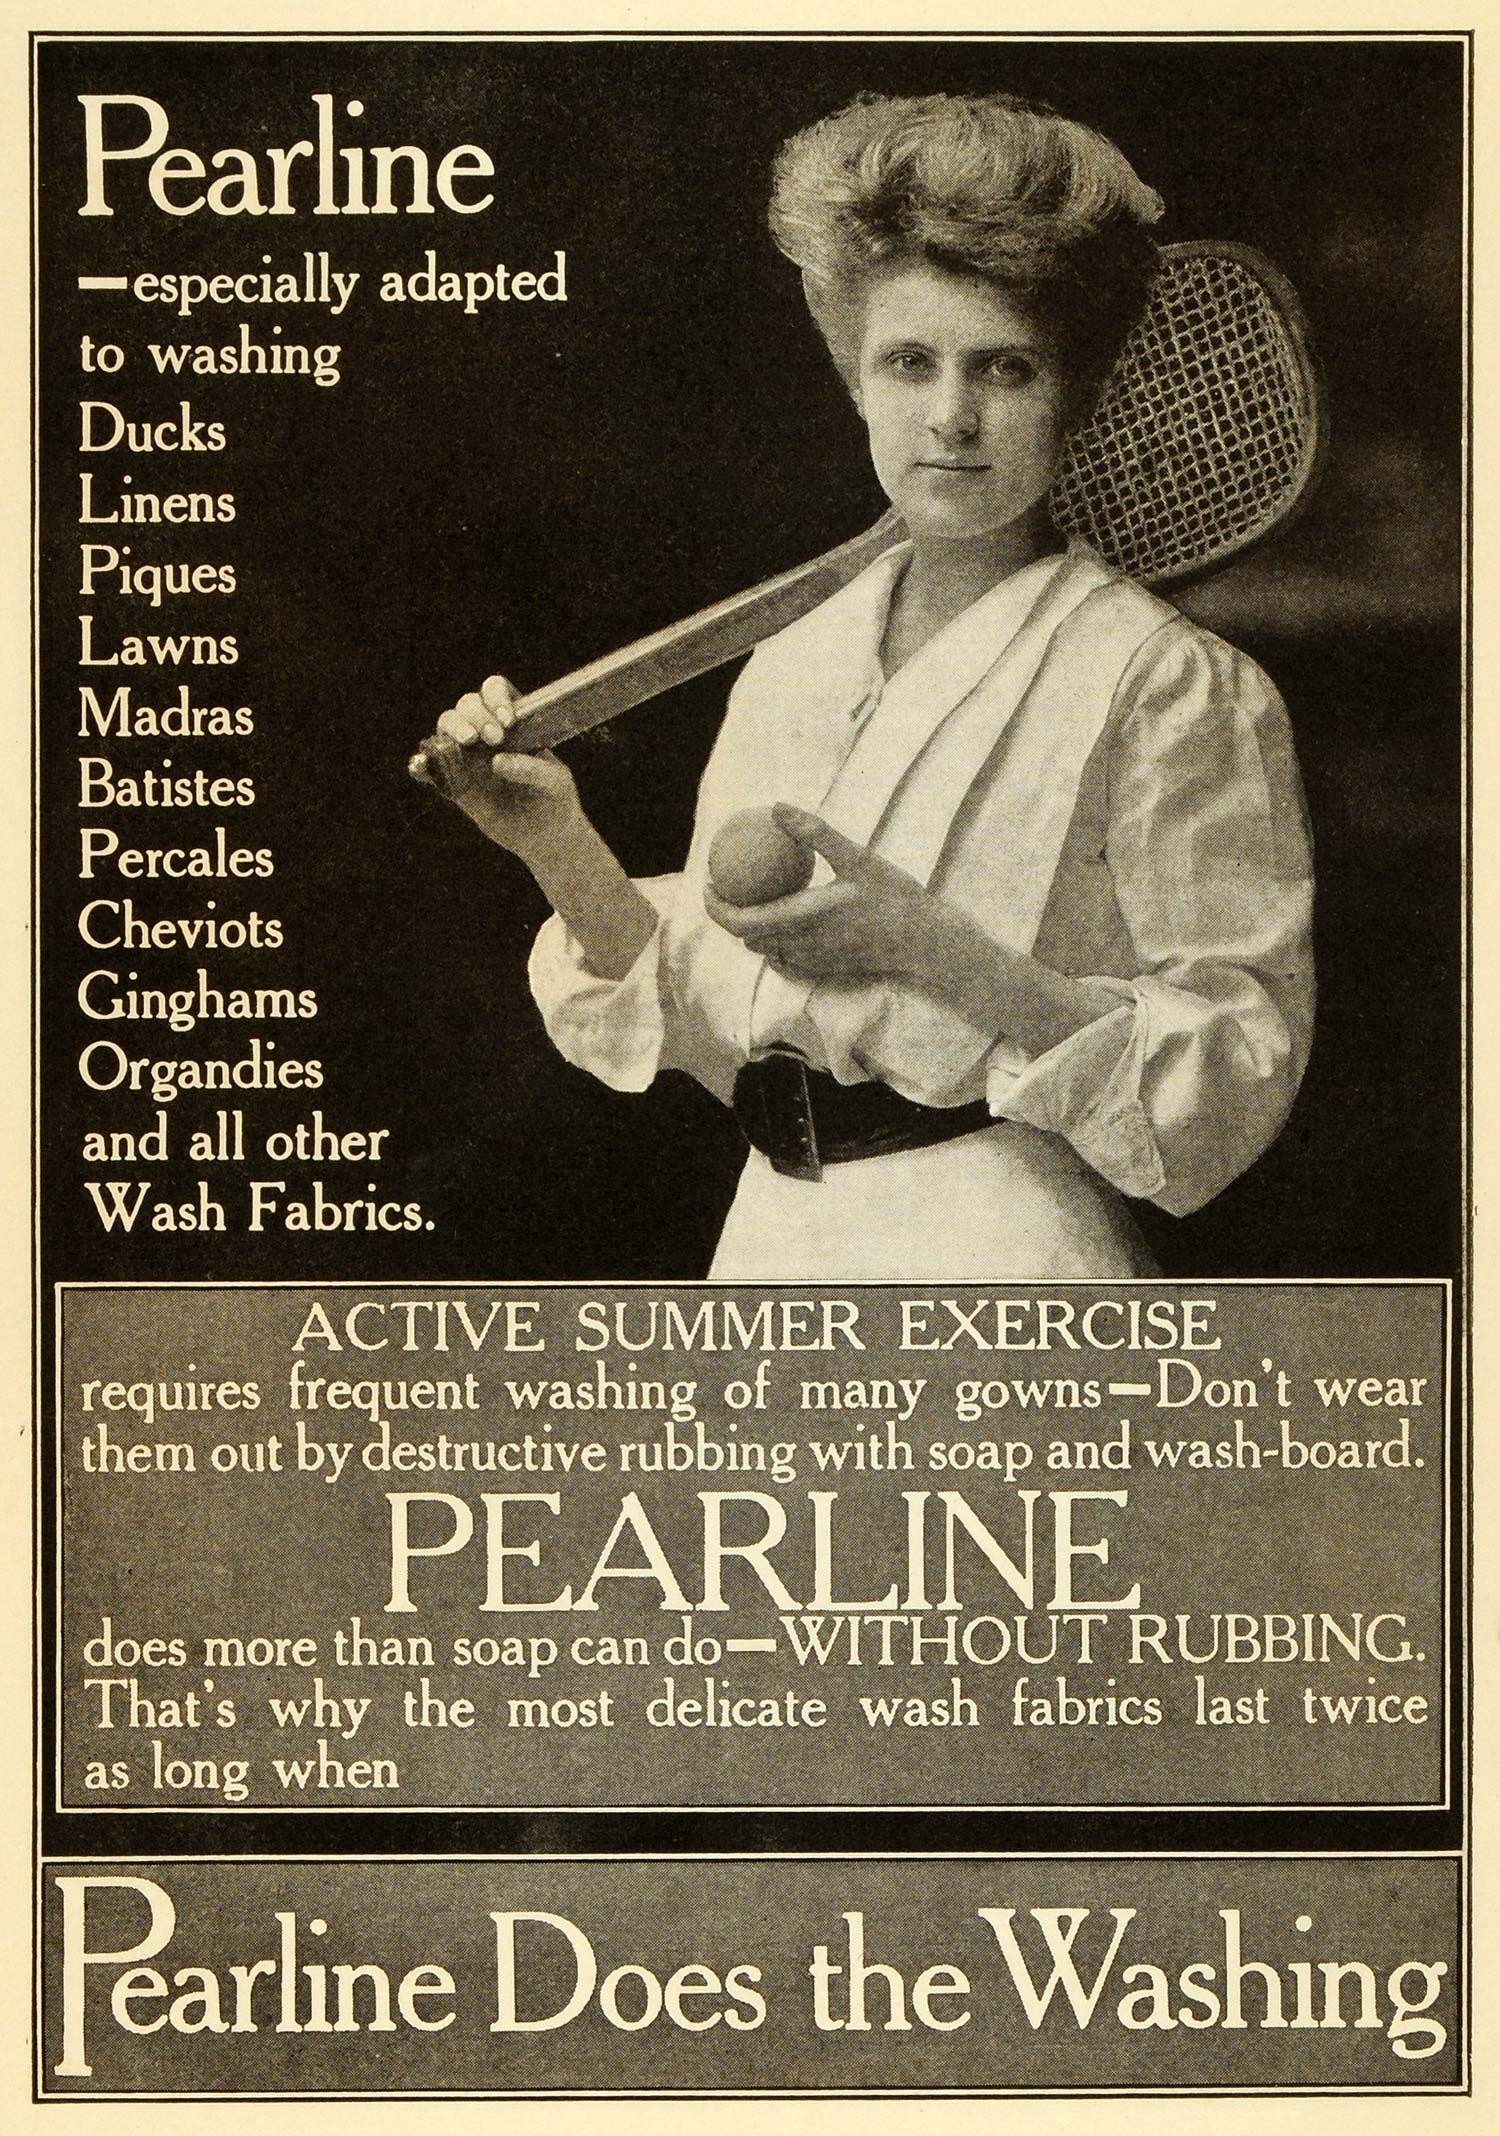 1909 Ad Pearline Soap Laundry Detergent Washing Household Chores Female EM2